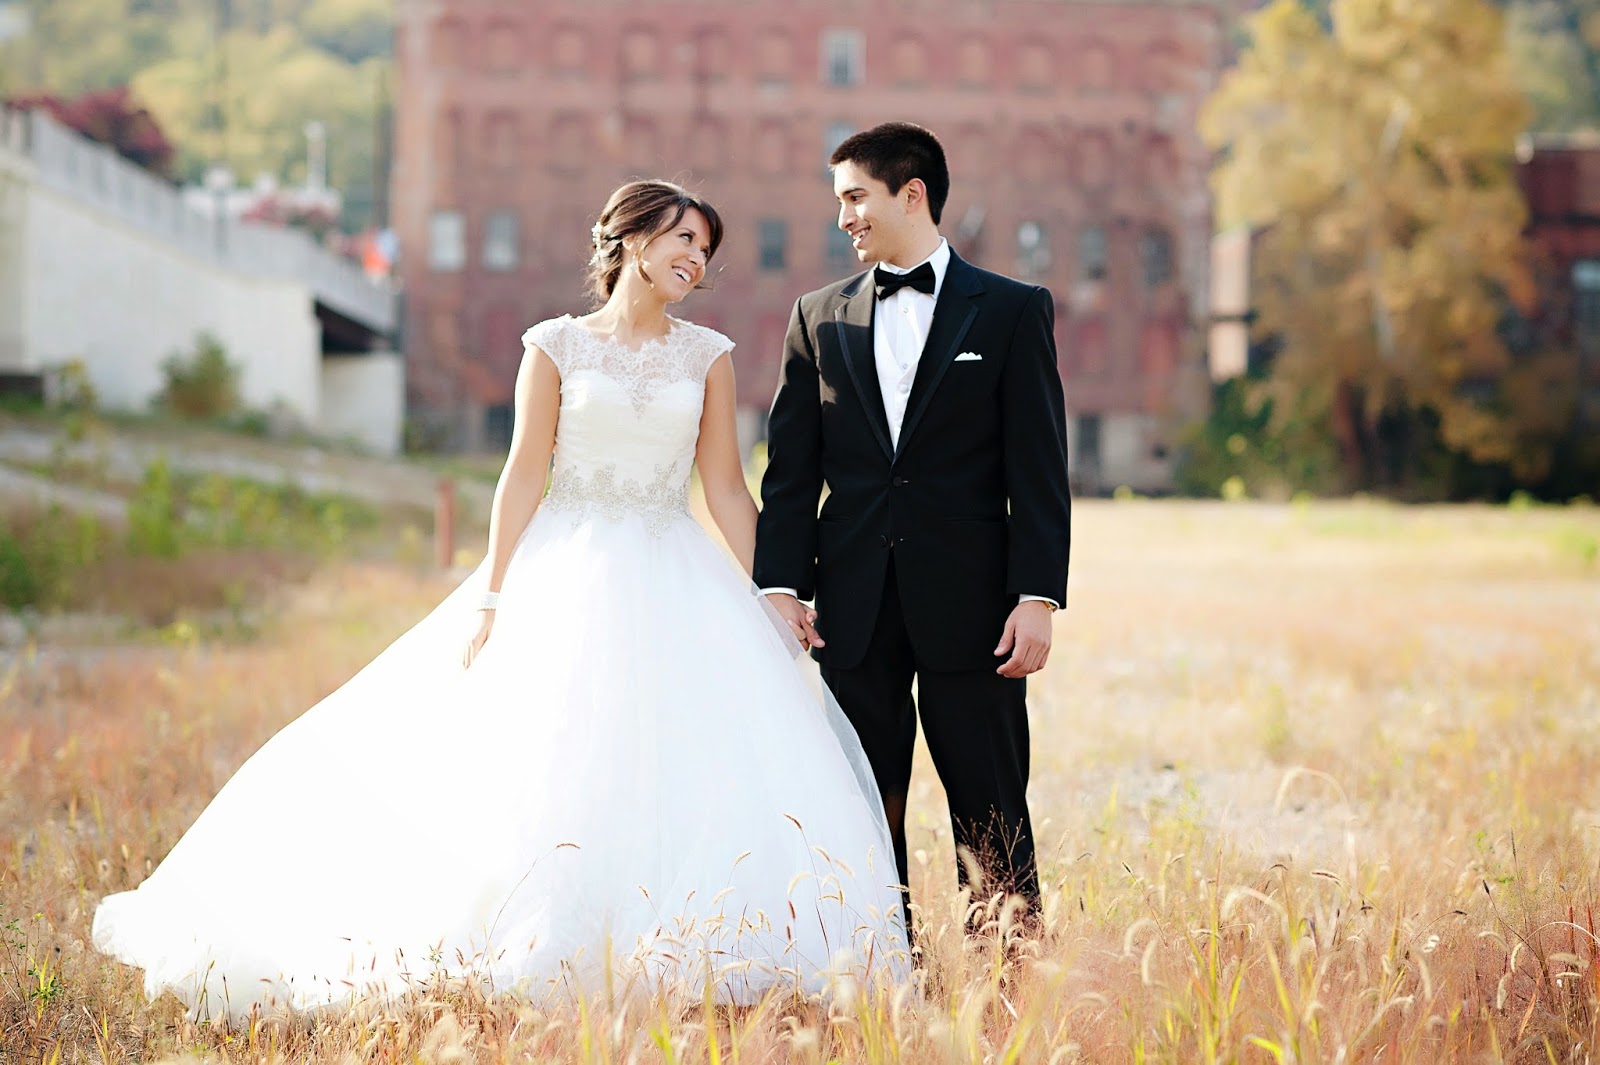 Expert professional wedding photographers for capturing your wedding moments